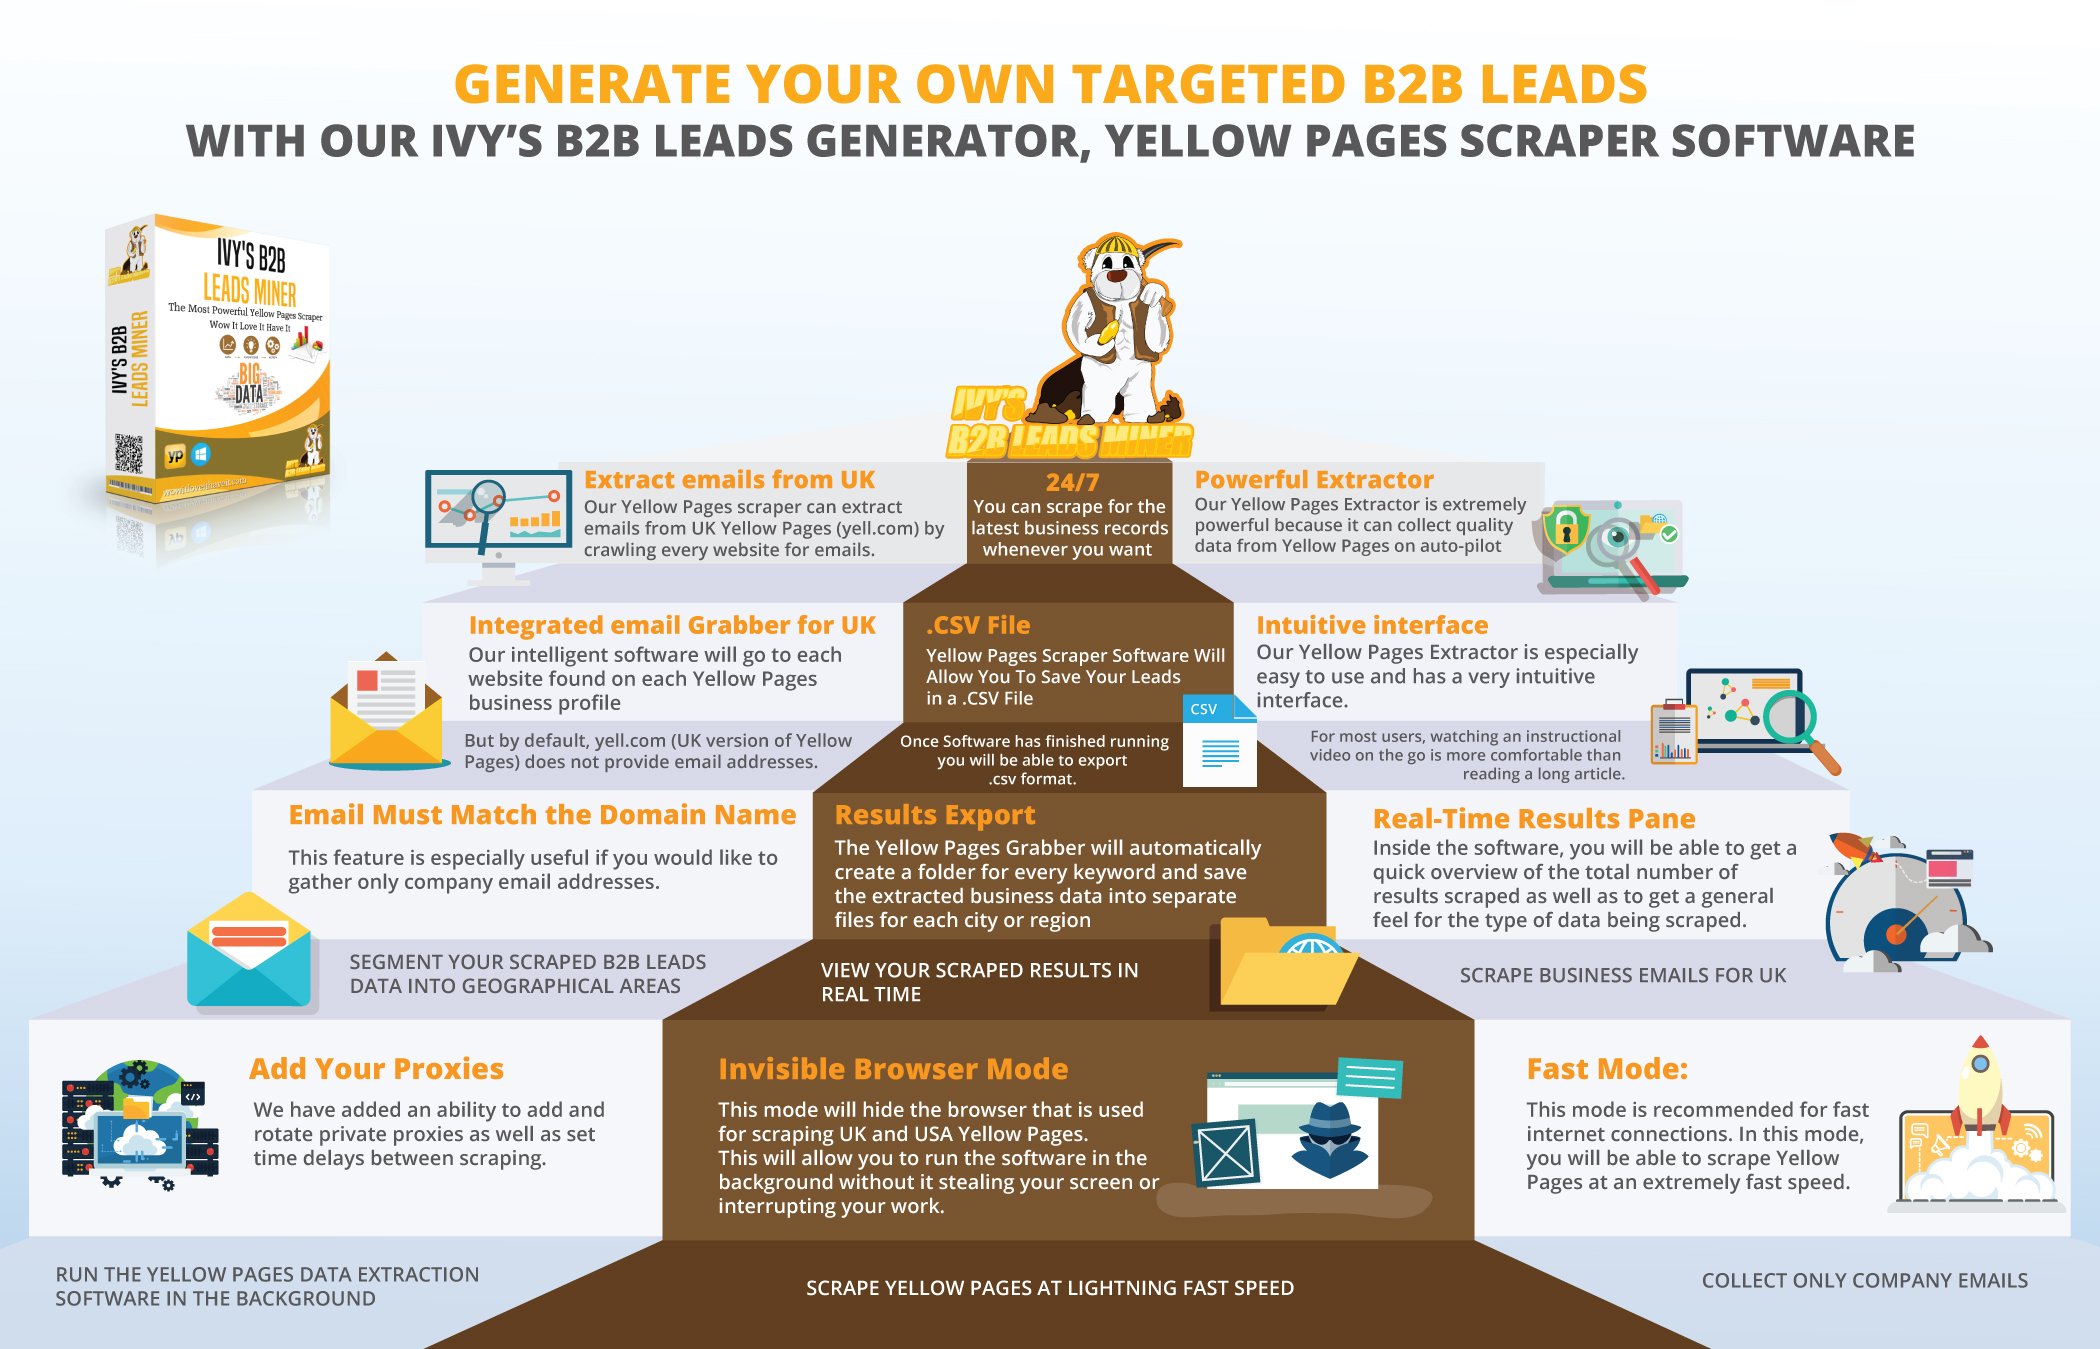 GENERATE UNLIMITED B2B LEADS WITH YELLOW PAGES DATA EXTRACTION SOFTWARE